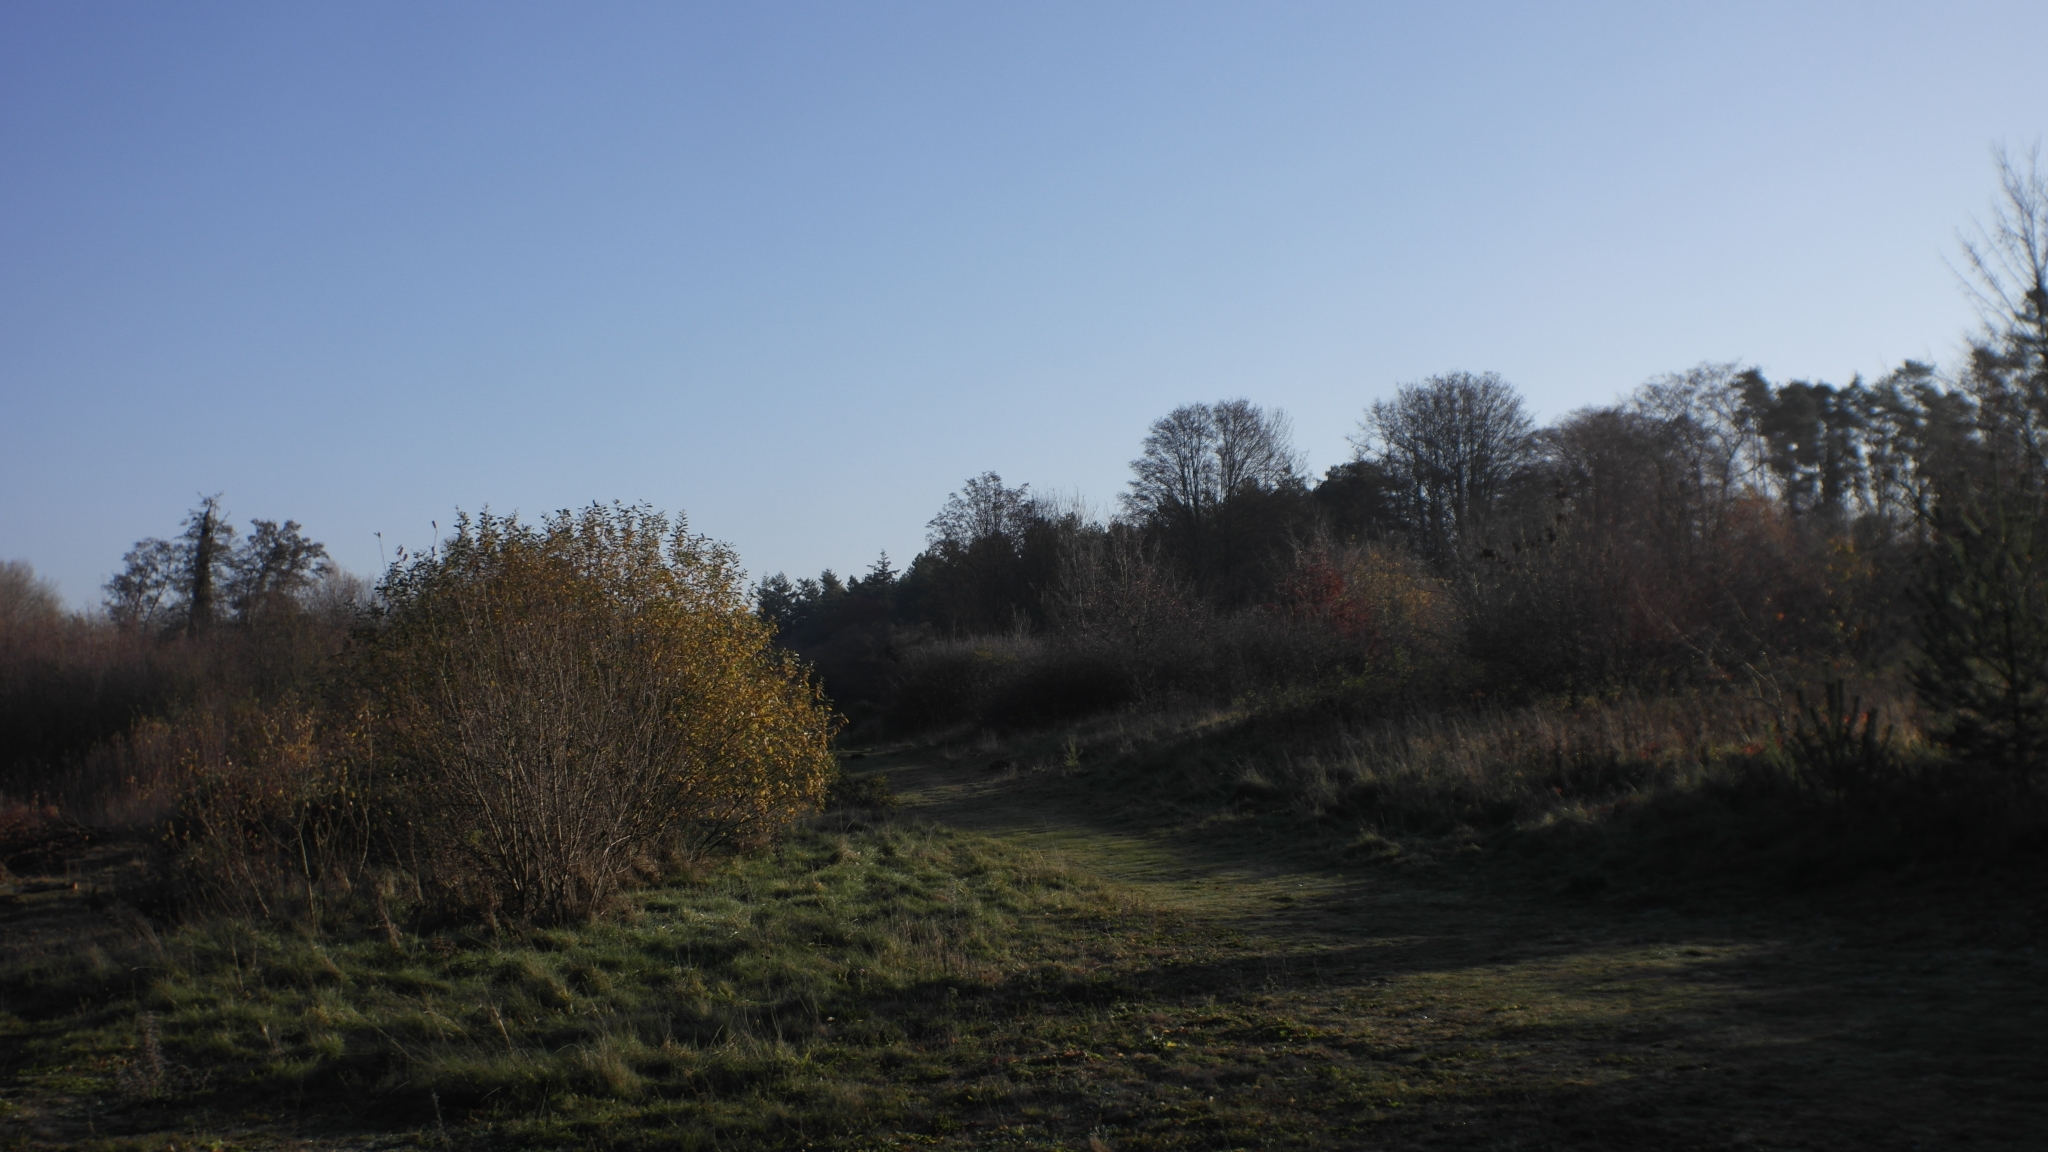 A photo from the FoTF Conservation Event - November 2018 - Undetaking clearance at the Lynford Lake Waters Edge : A shot of the vista from the waters edge at Lynford Lake